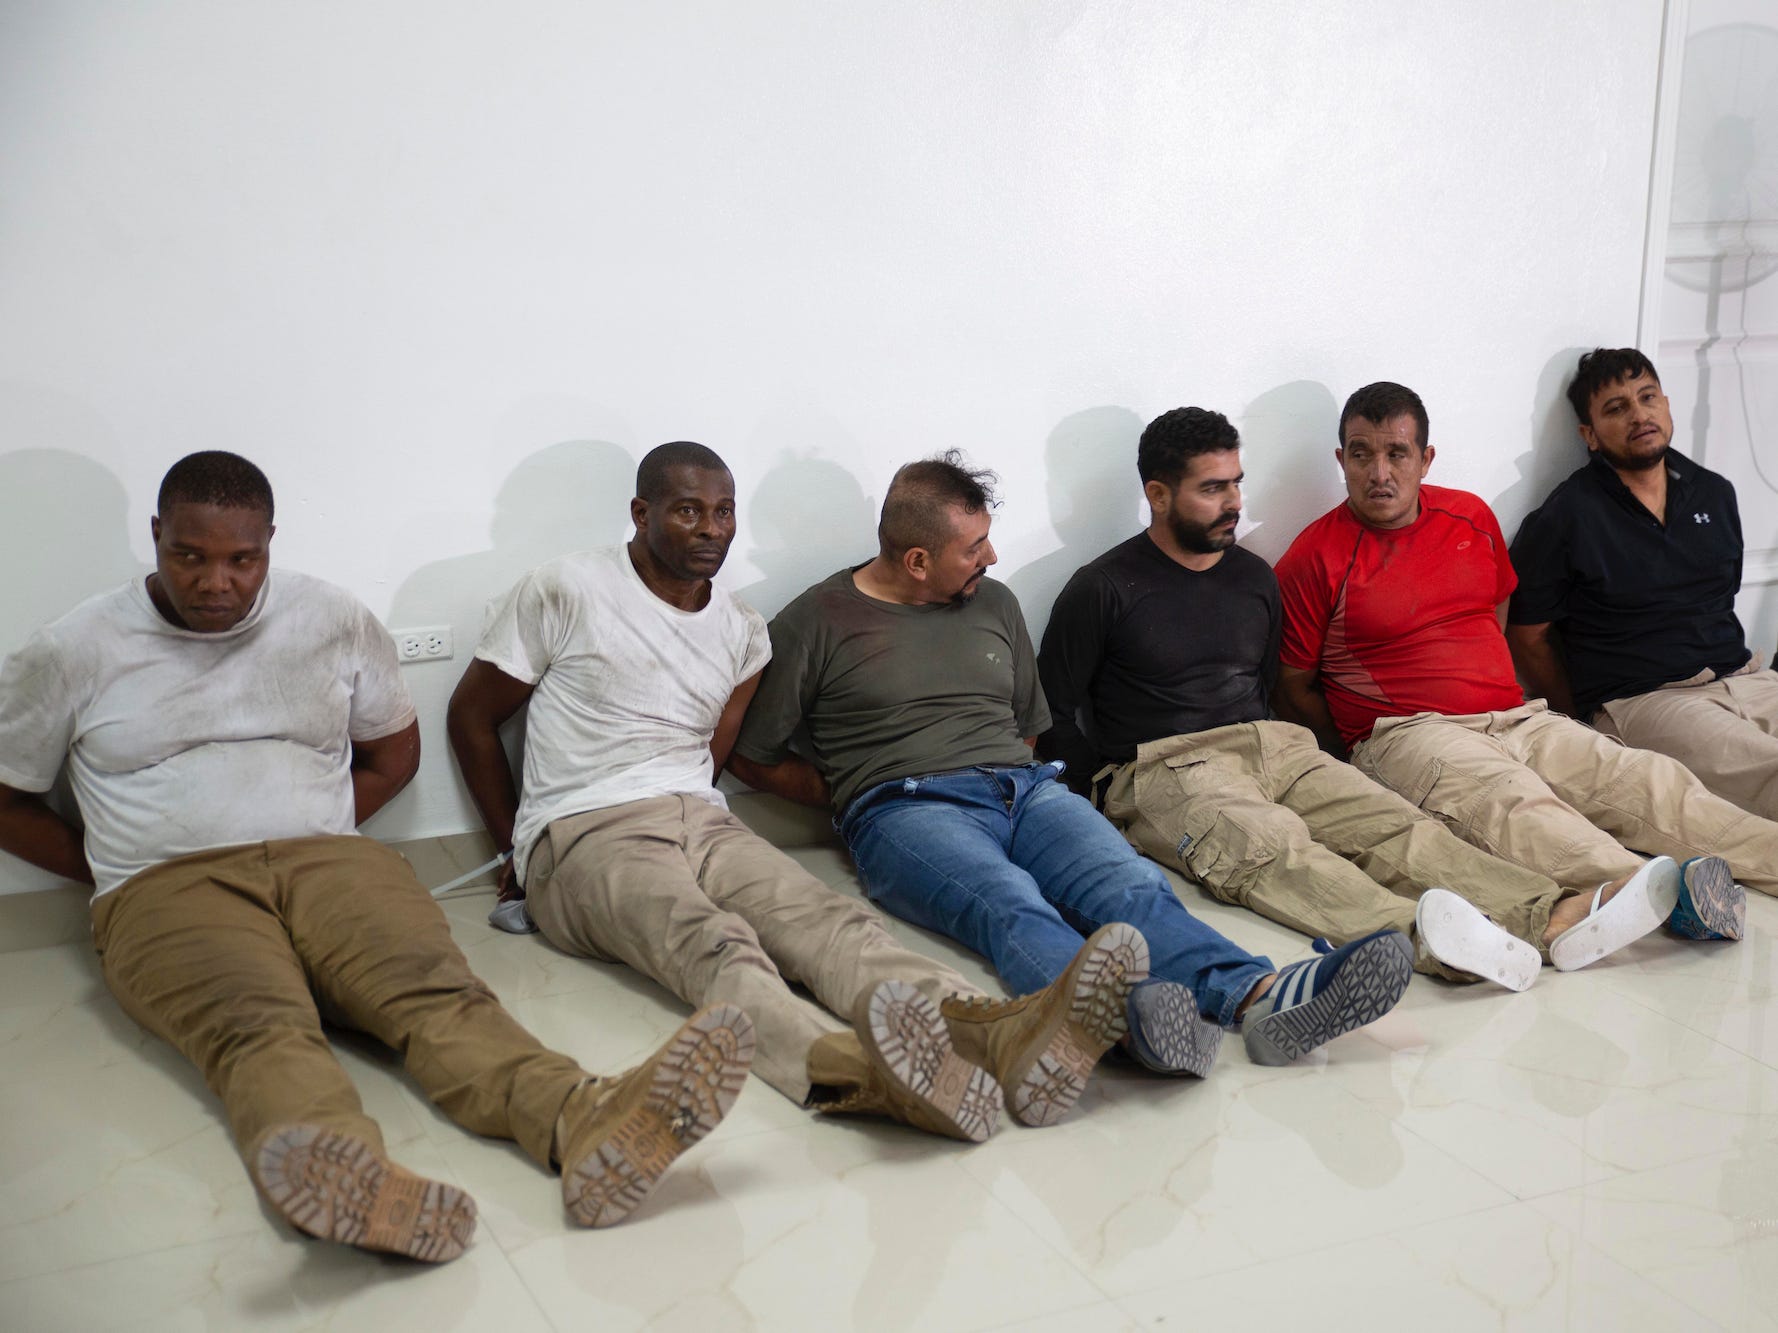 James Solages sits on the floor alongside five other suspects in the killing of Haitian president Jovenel Moïse.